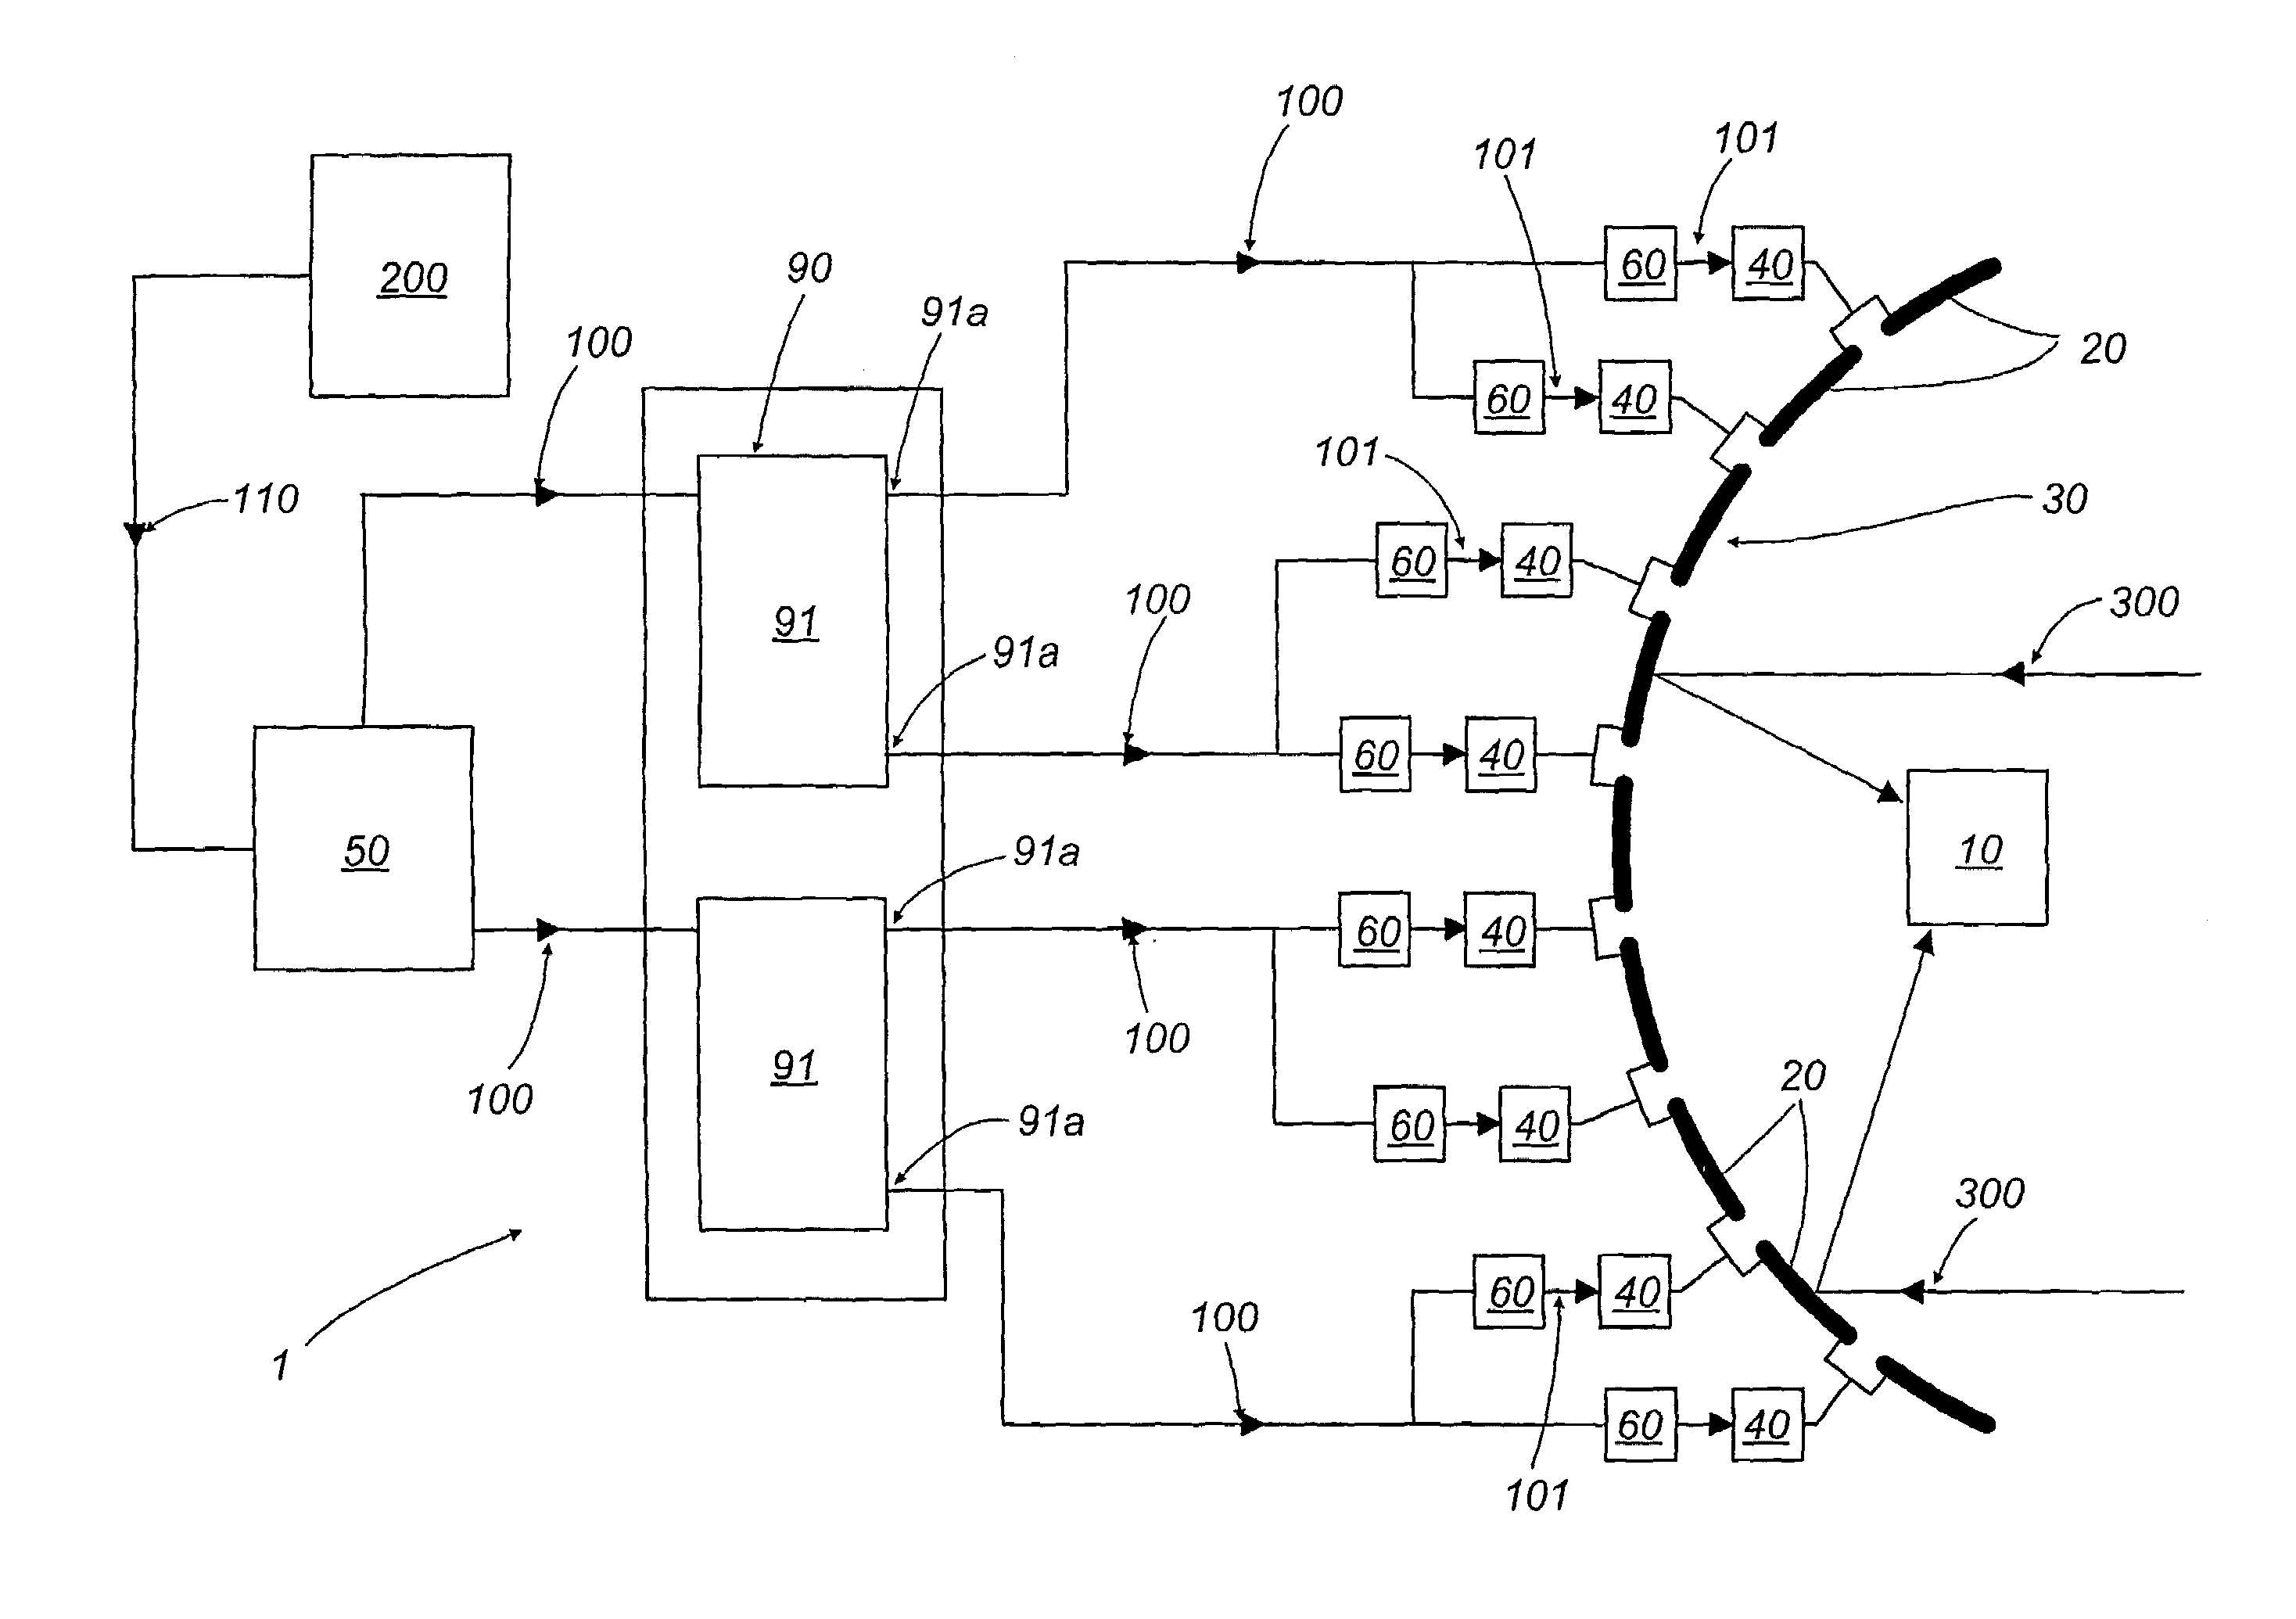 Apparatus for detecting electromagnetic radiation, in particular for radio astronomic applications